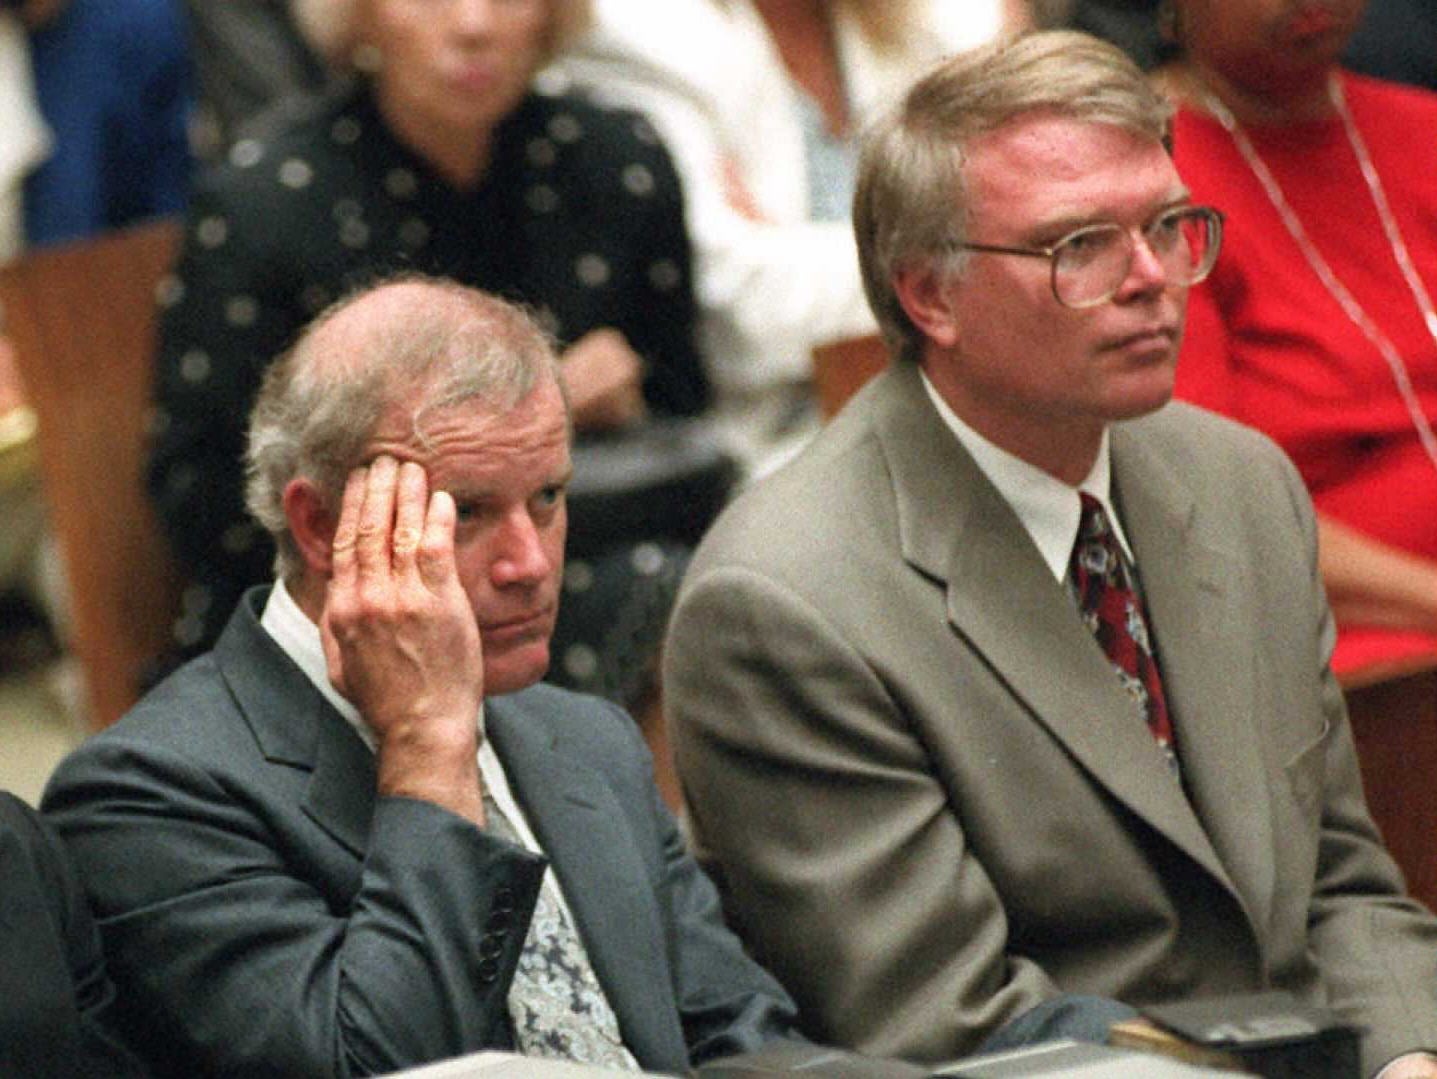 The defence team at OJ Simpson’s 1995 trial decided against calling Mullis (left) as an expert witness